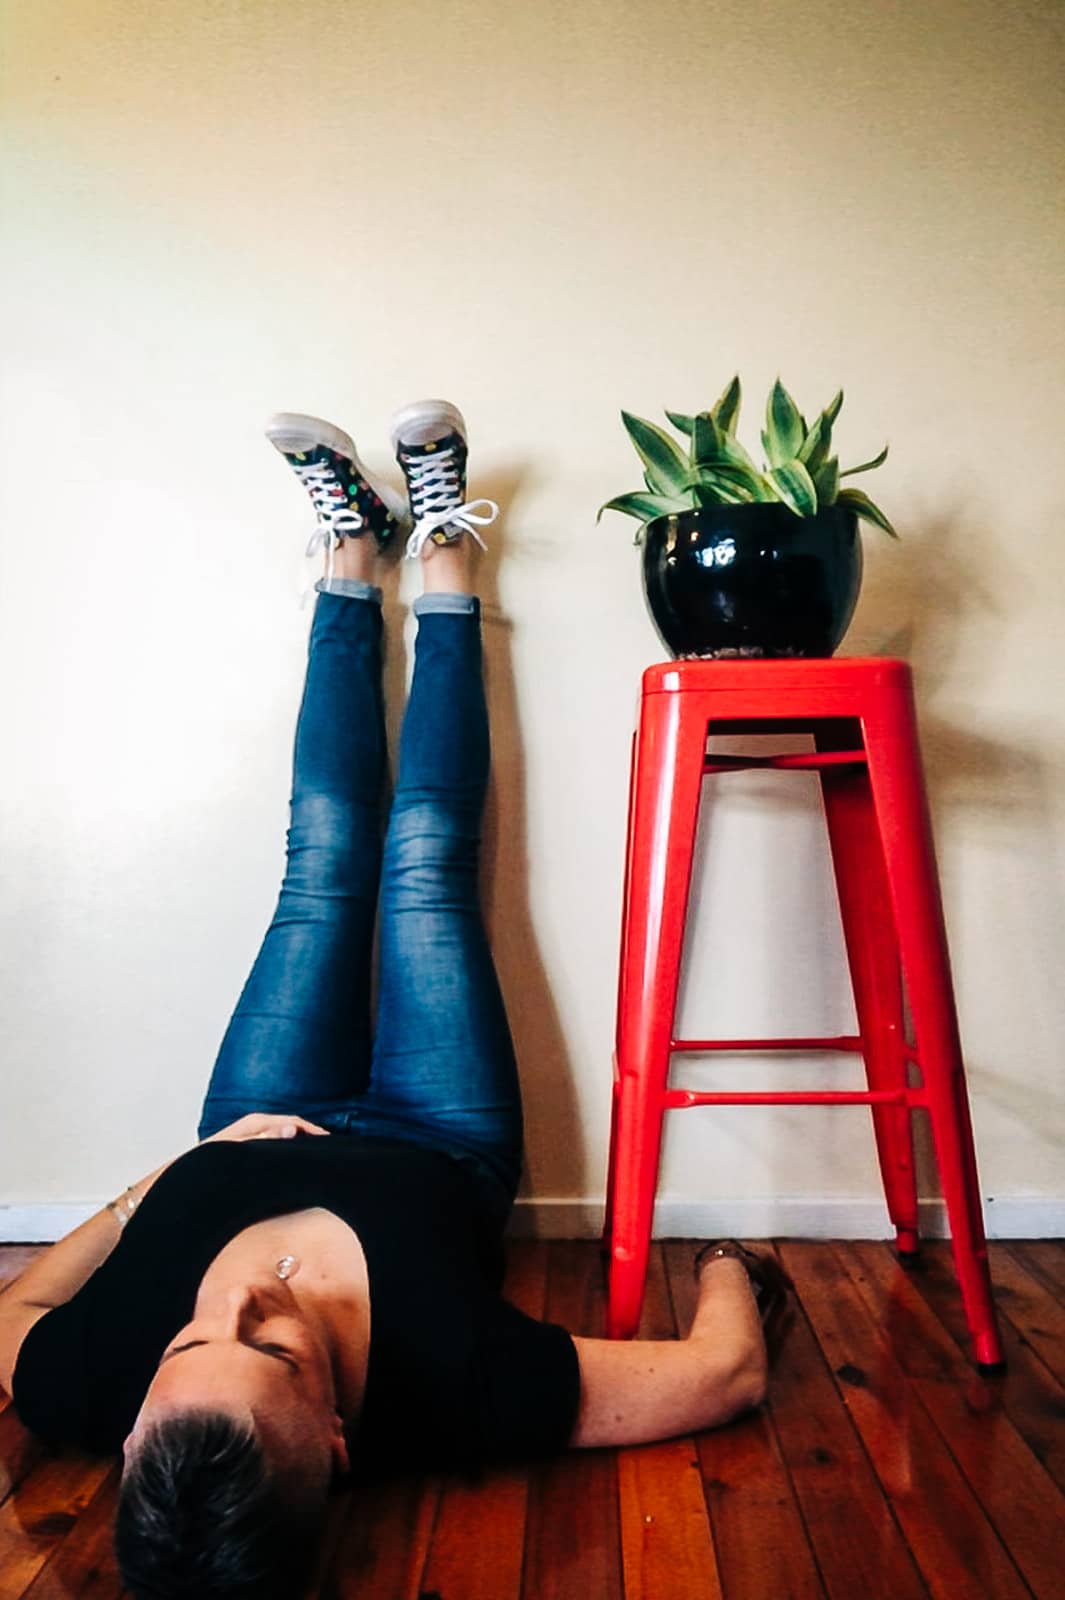 Lying on the floor with legs up on the wall. A red stool with a plant in a black pot is next to the person